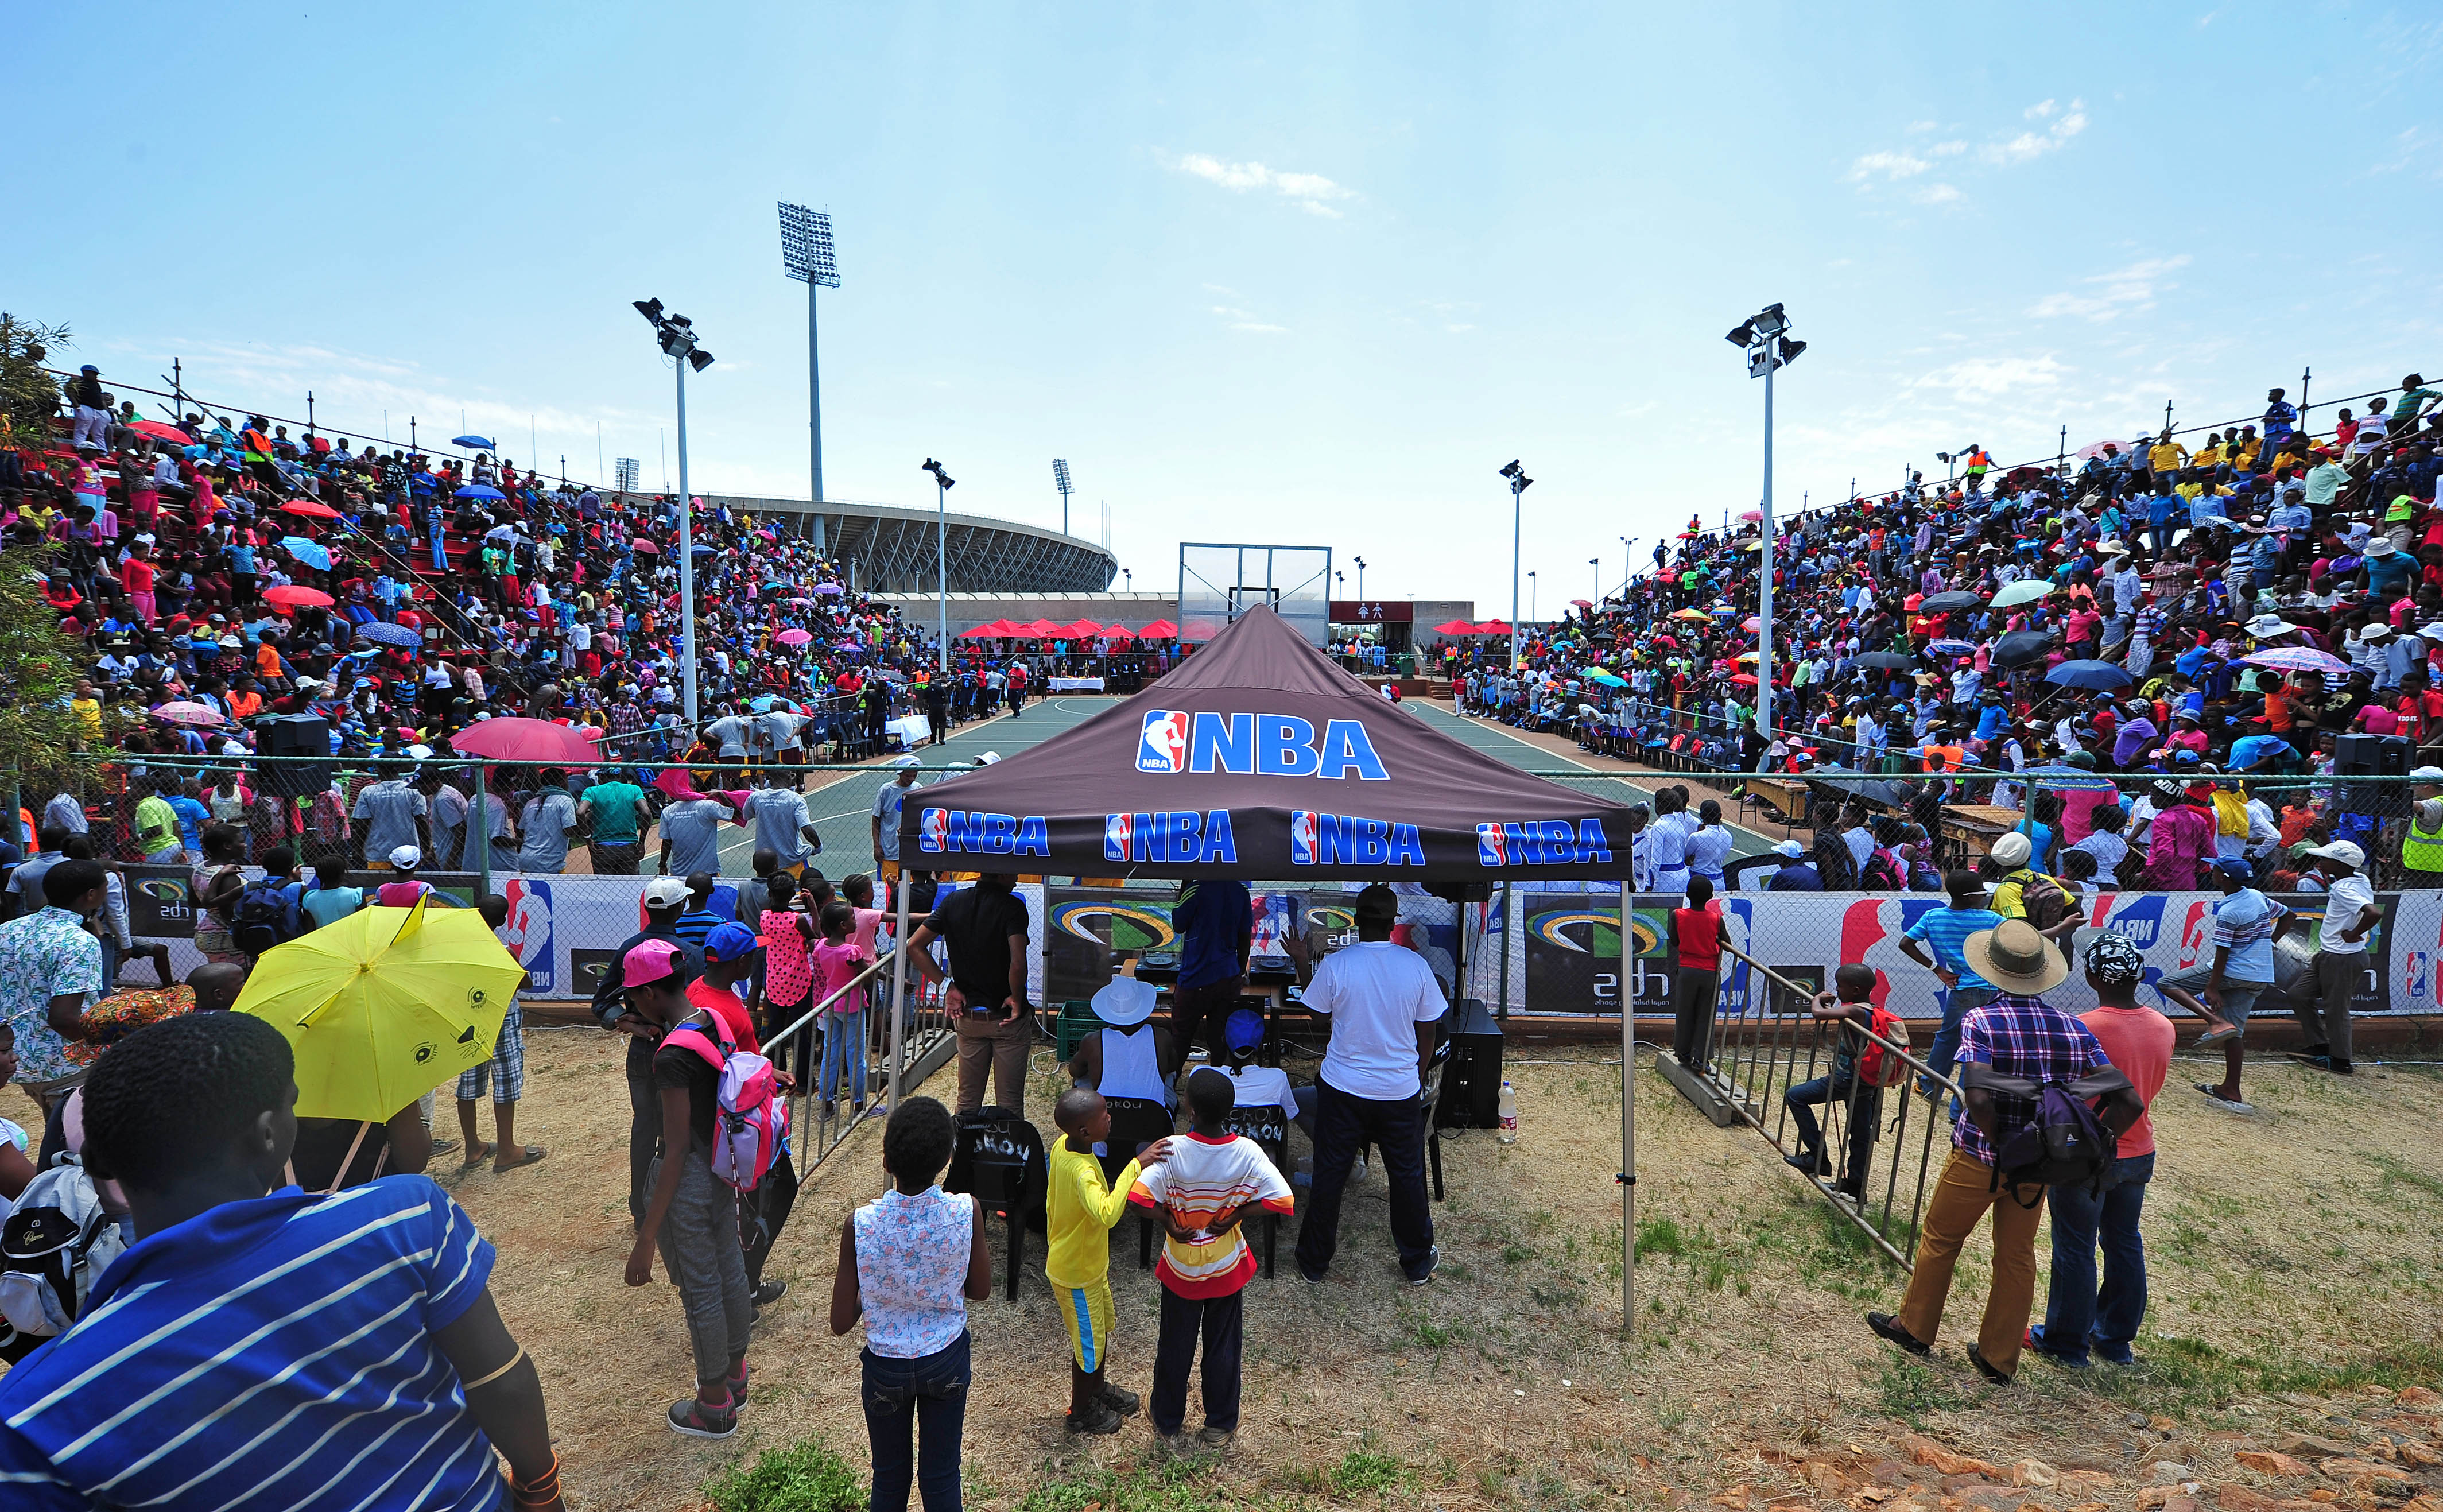 RBS Basketball League Finals: 6000 spectators came to show support, 25 October 2014